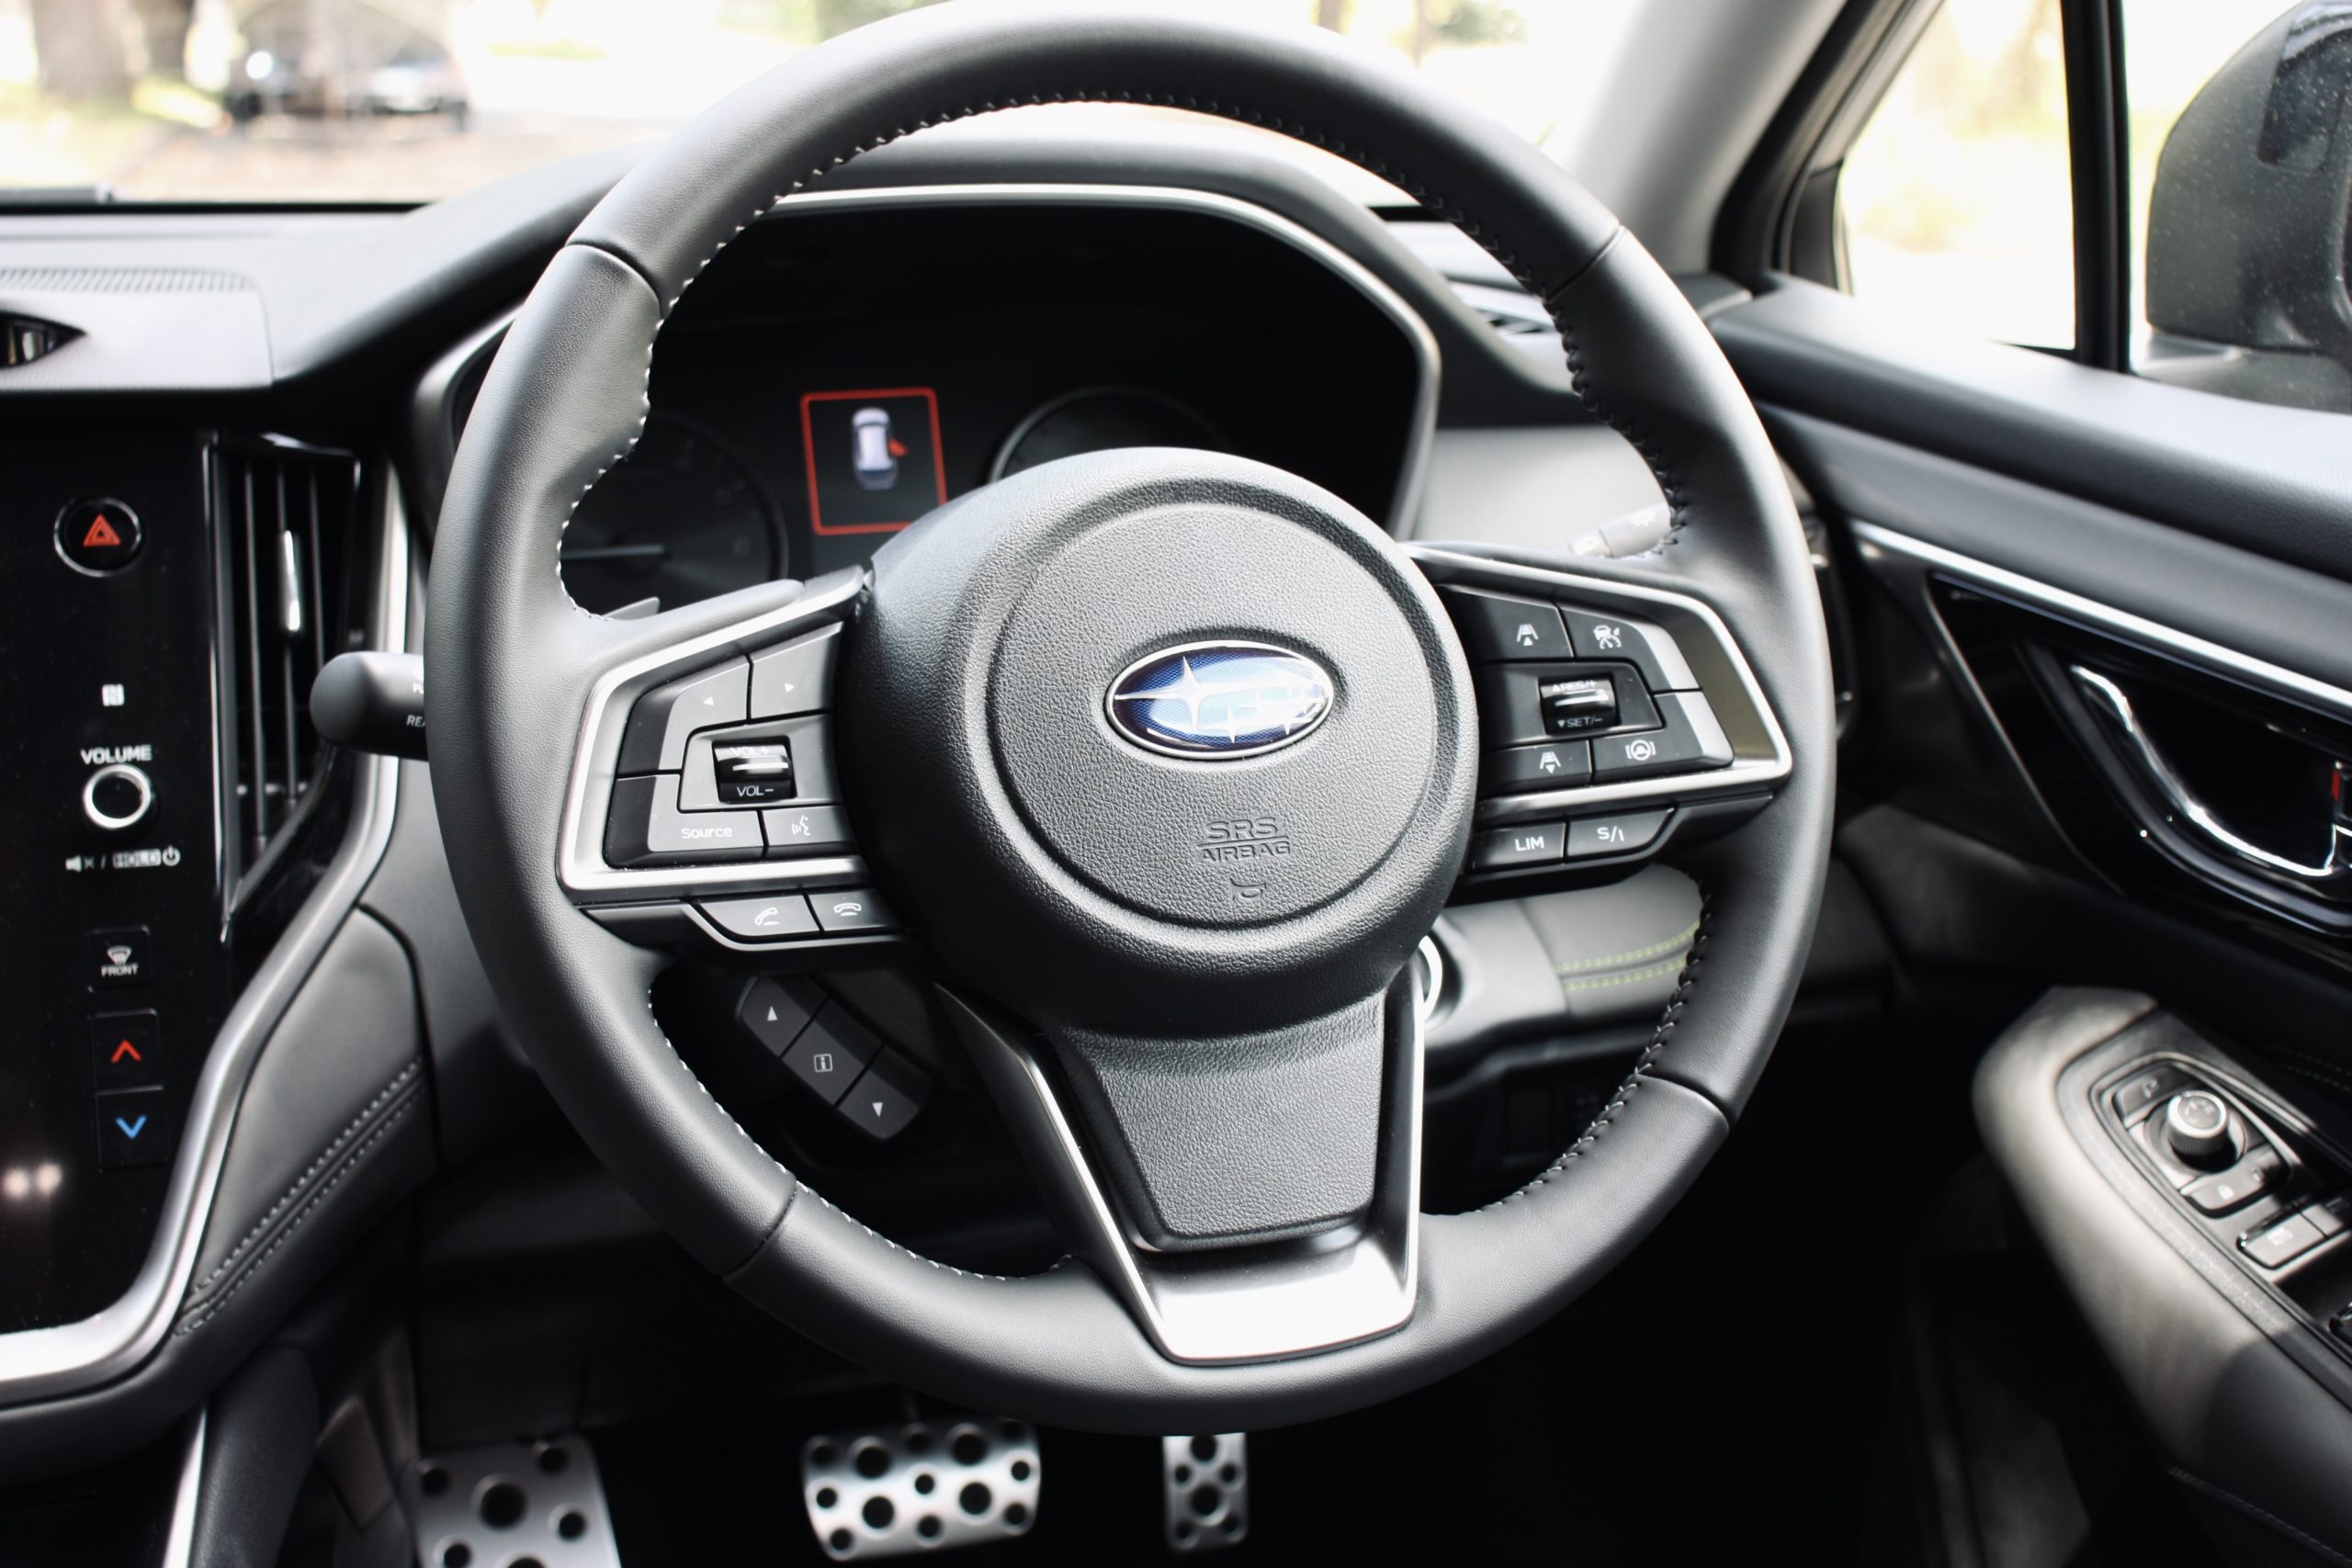 Leather-wrapped steering wheel